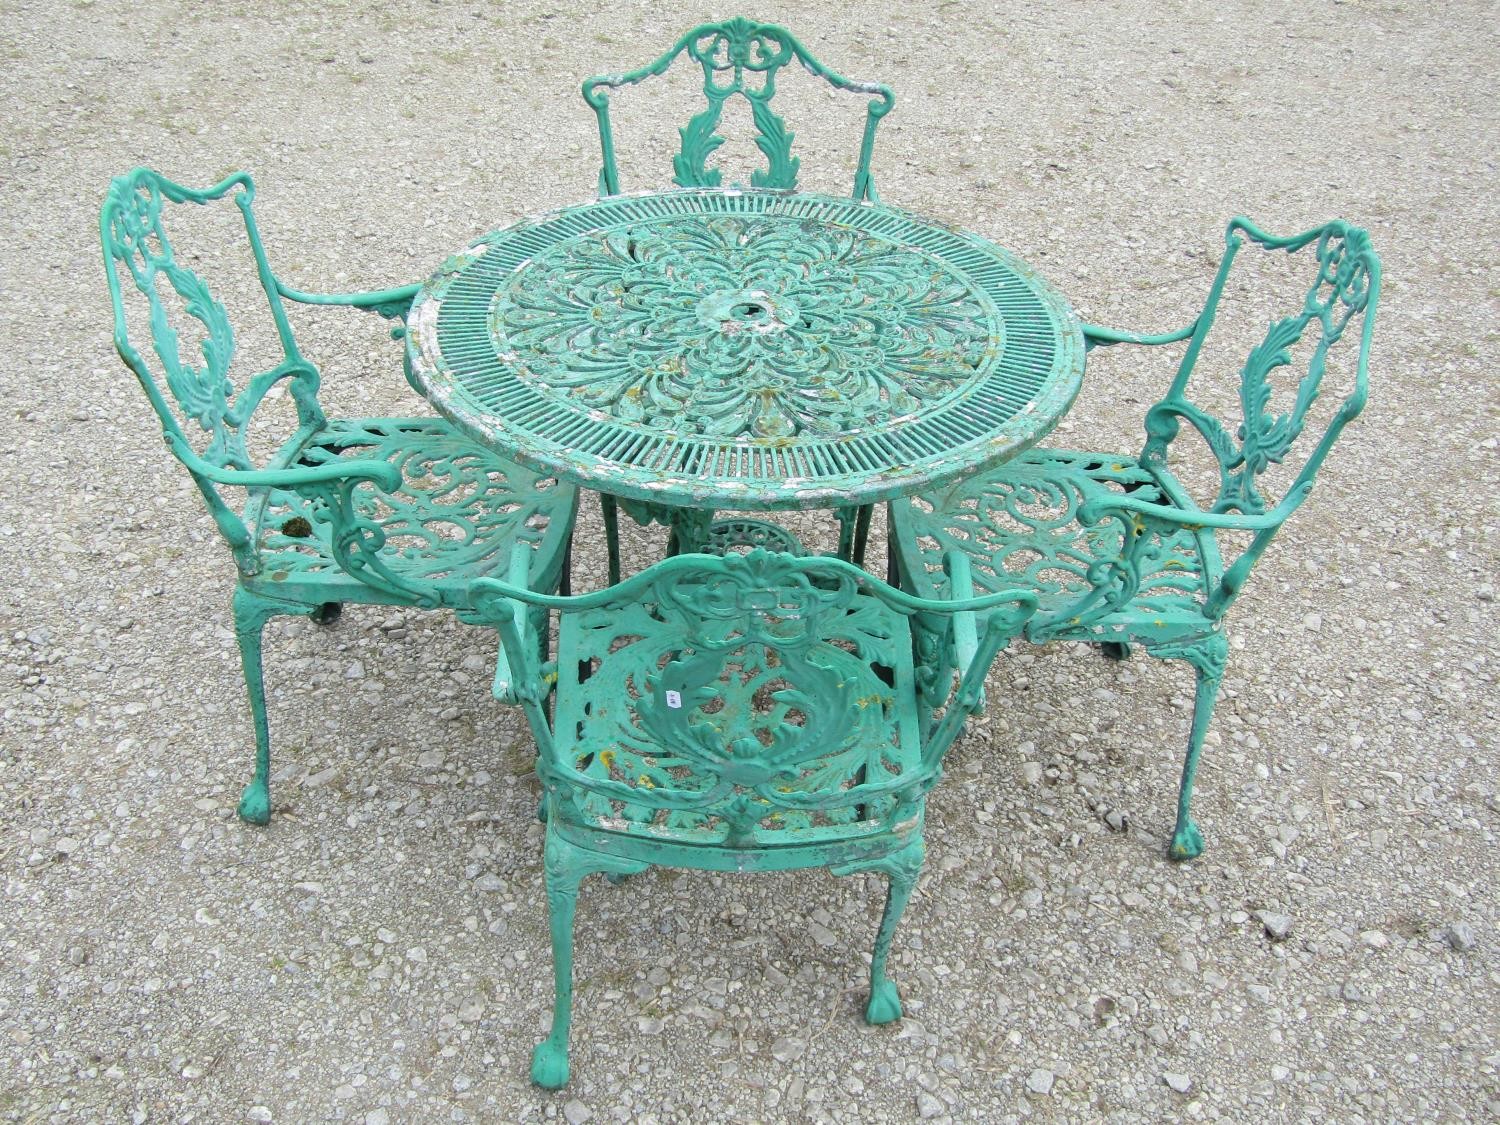 A weathered green painted cast aluminium garden terrace table of circular form with decorative